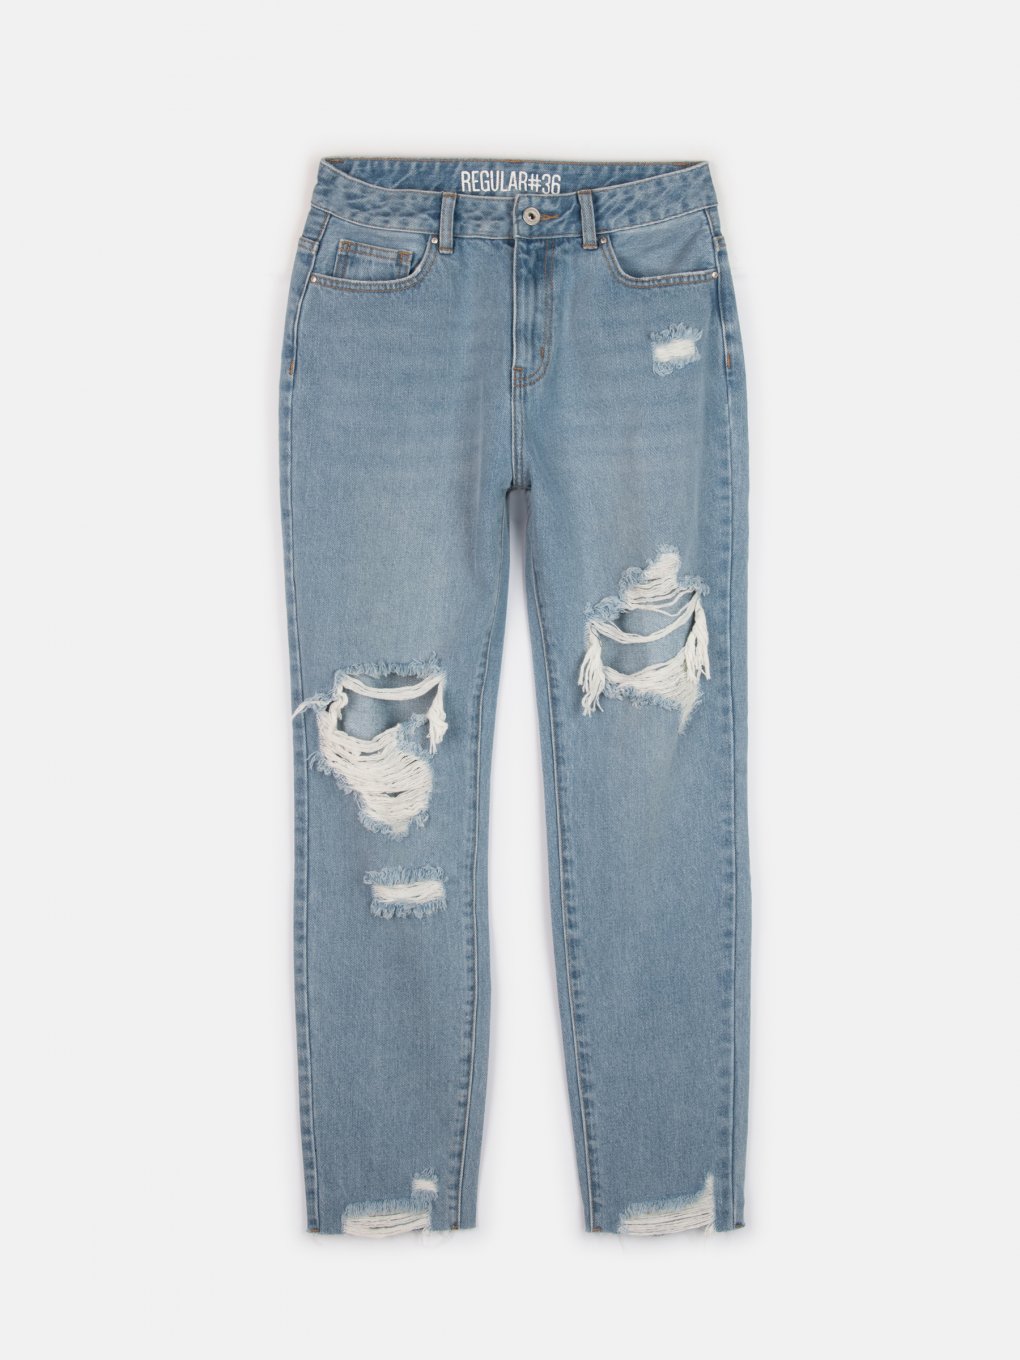 Regular jeans with damages